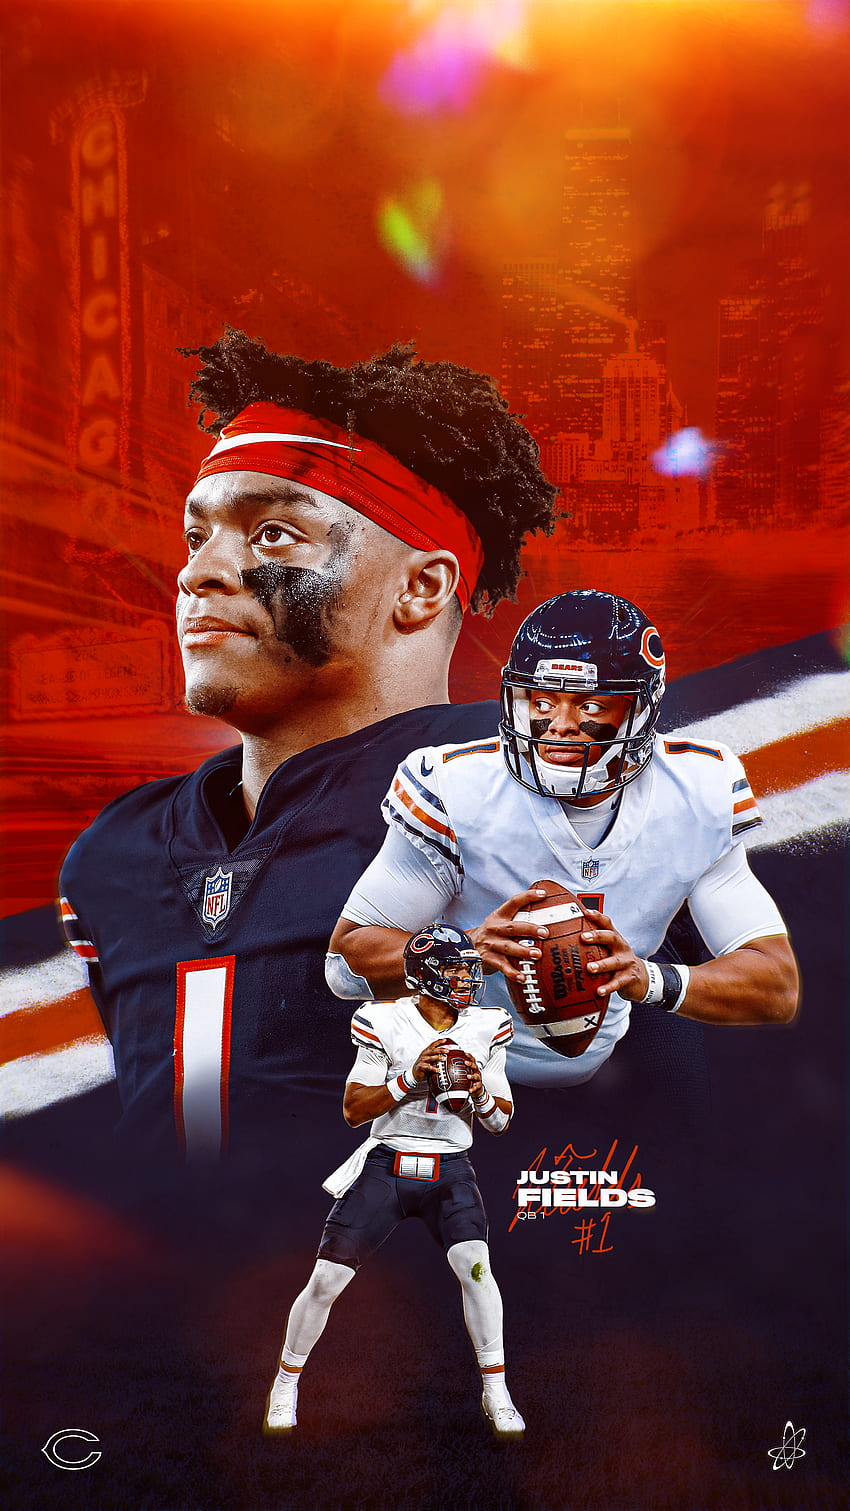 Download our 2021 Bears schedule wallpaper featuring Justin Fields